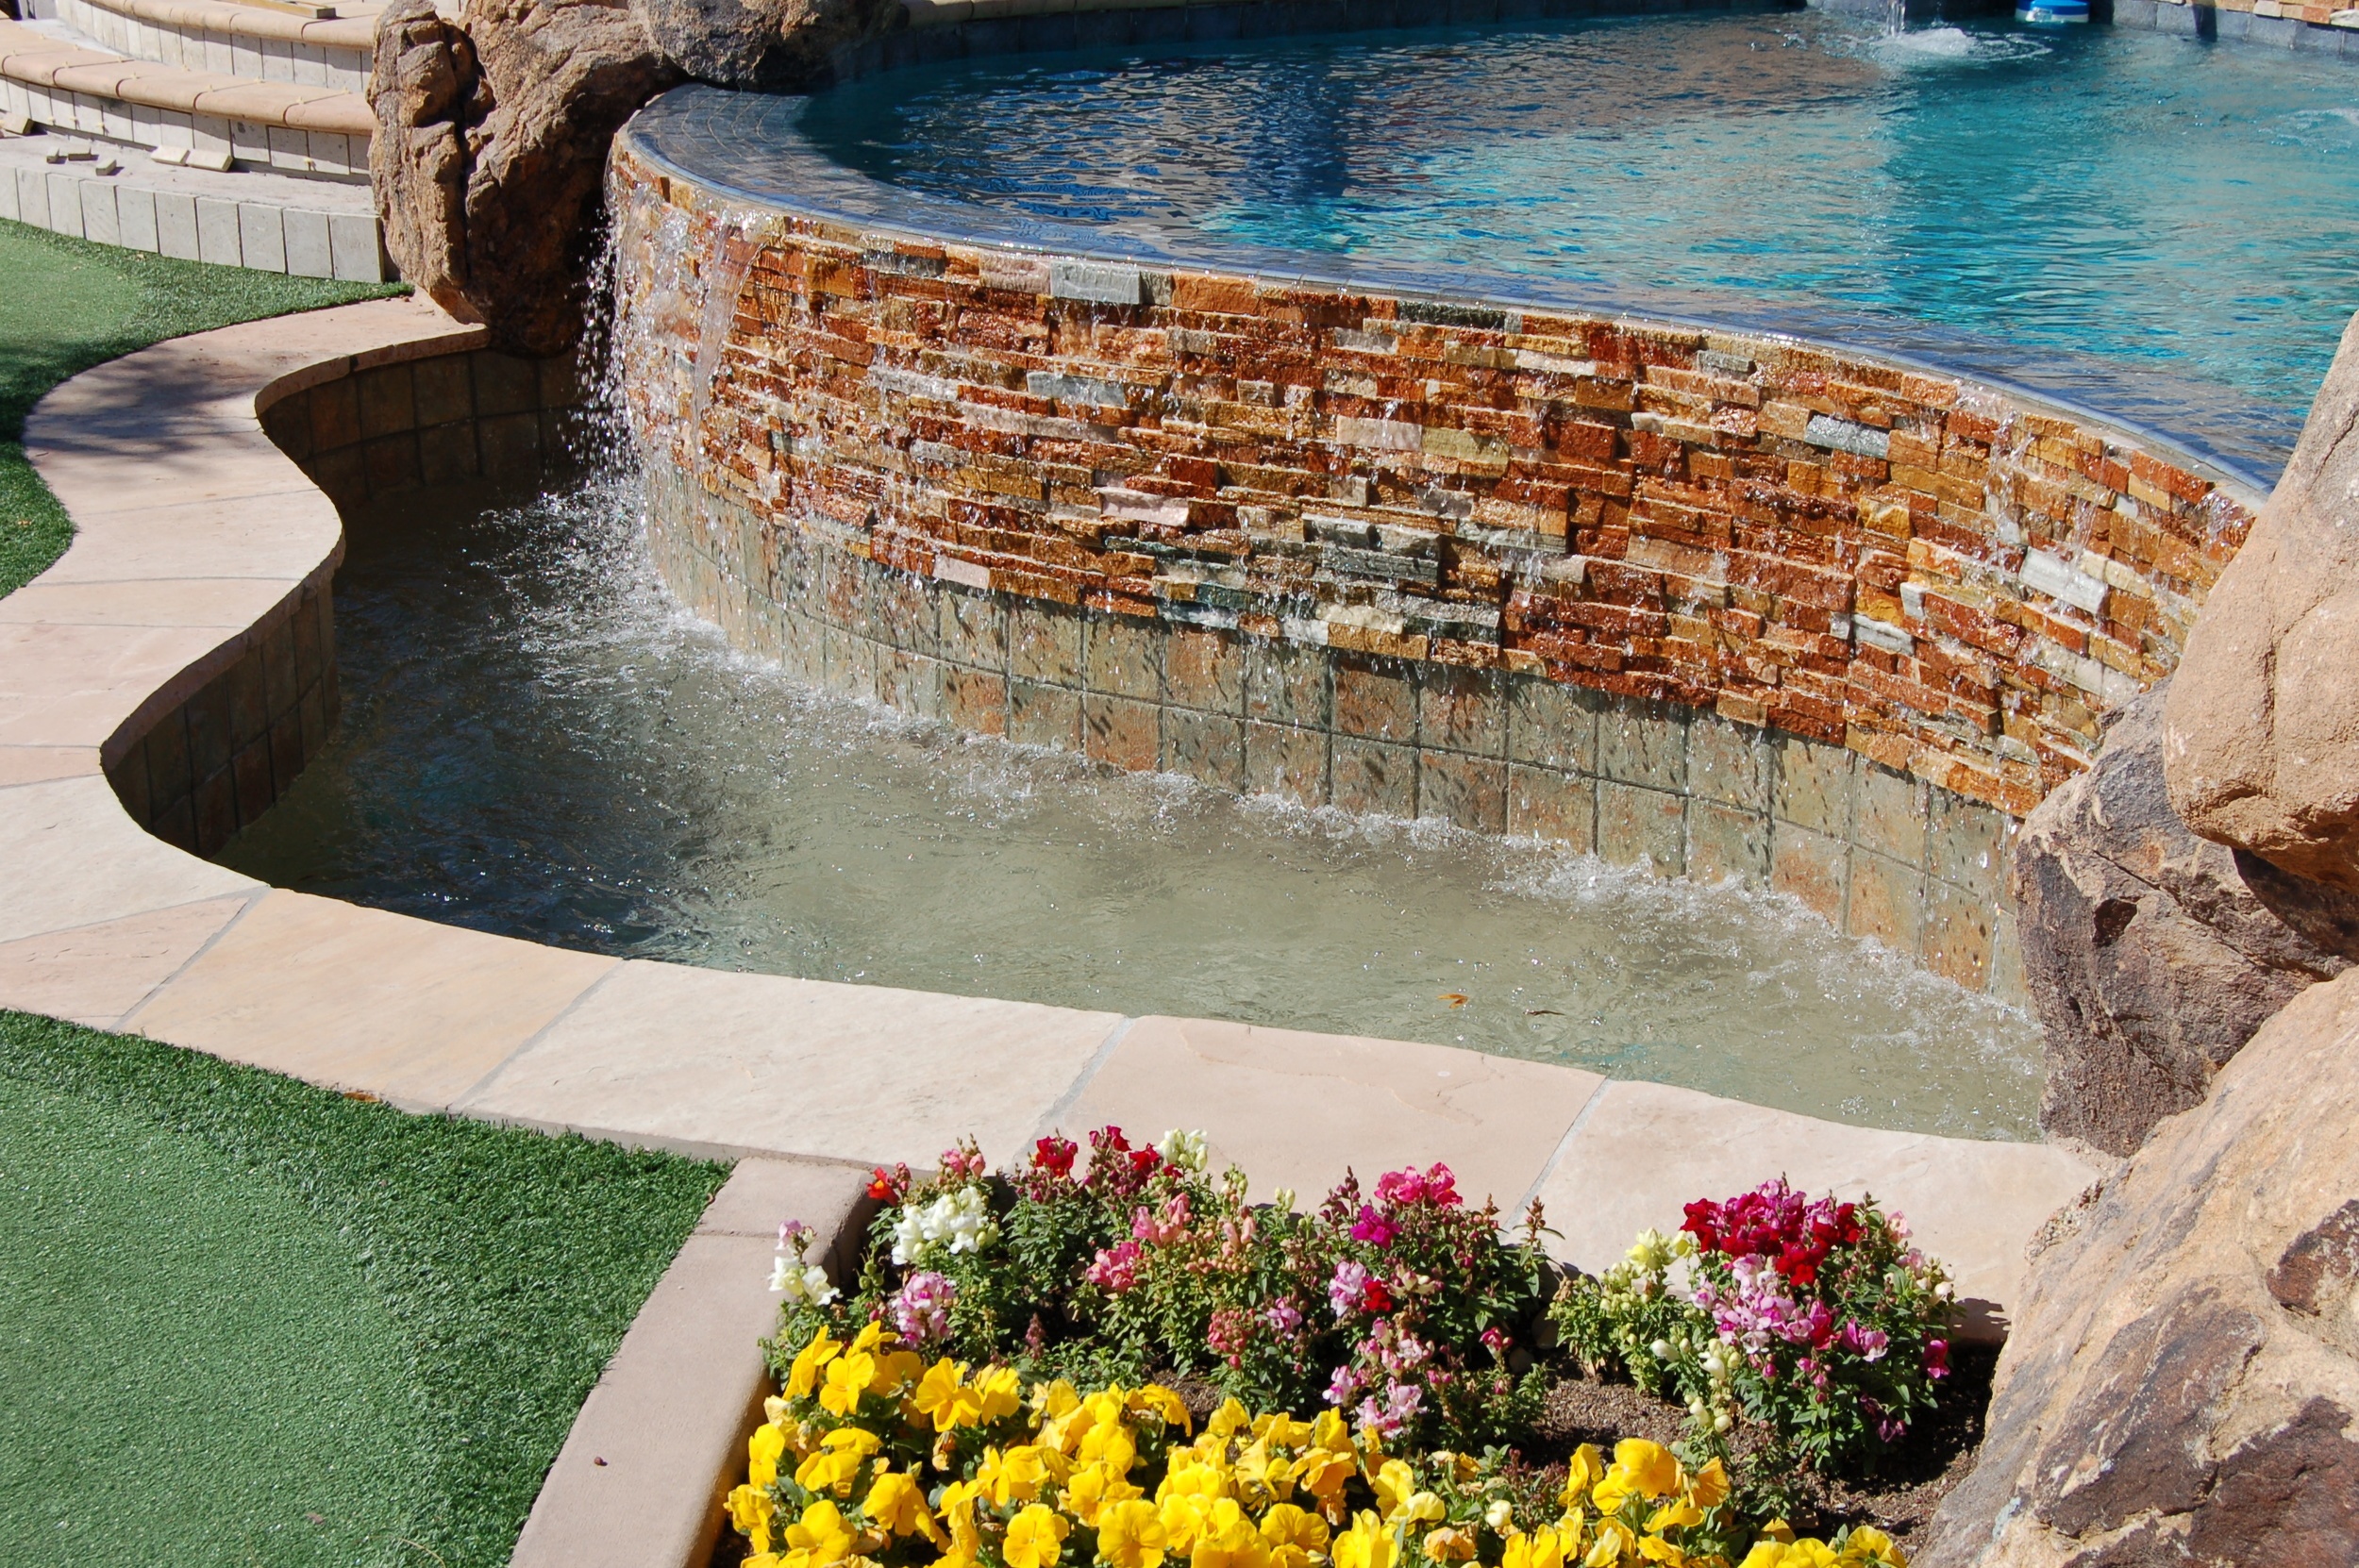 INCORPORATING THE SOUND OF WATER IN YOUR BACKYARD DESIGN